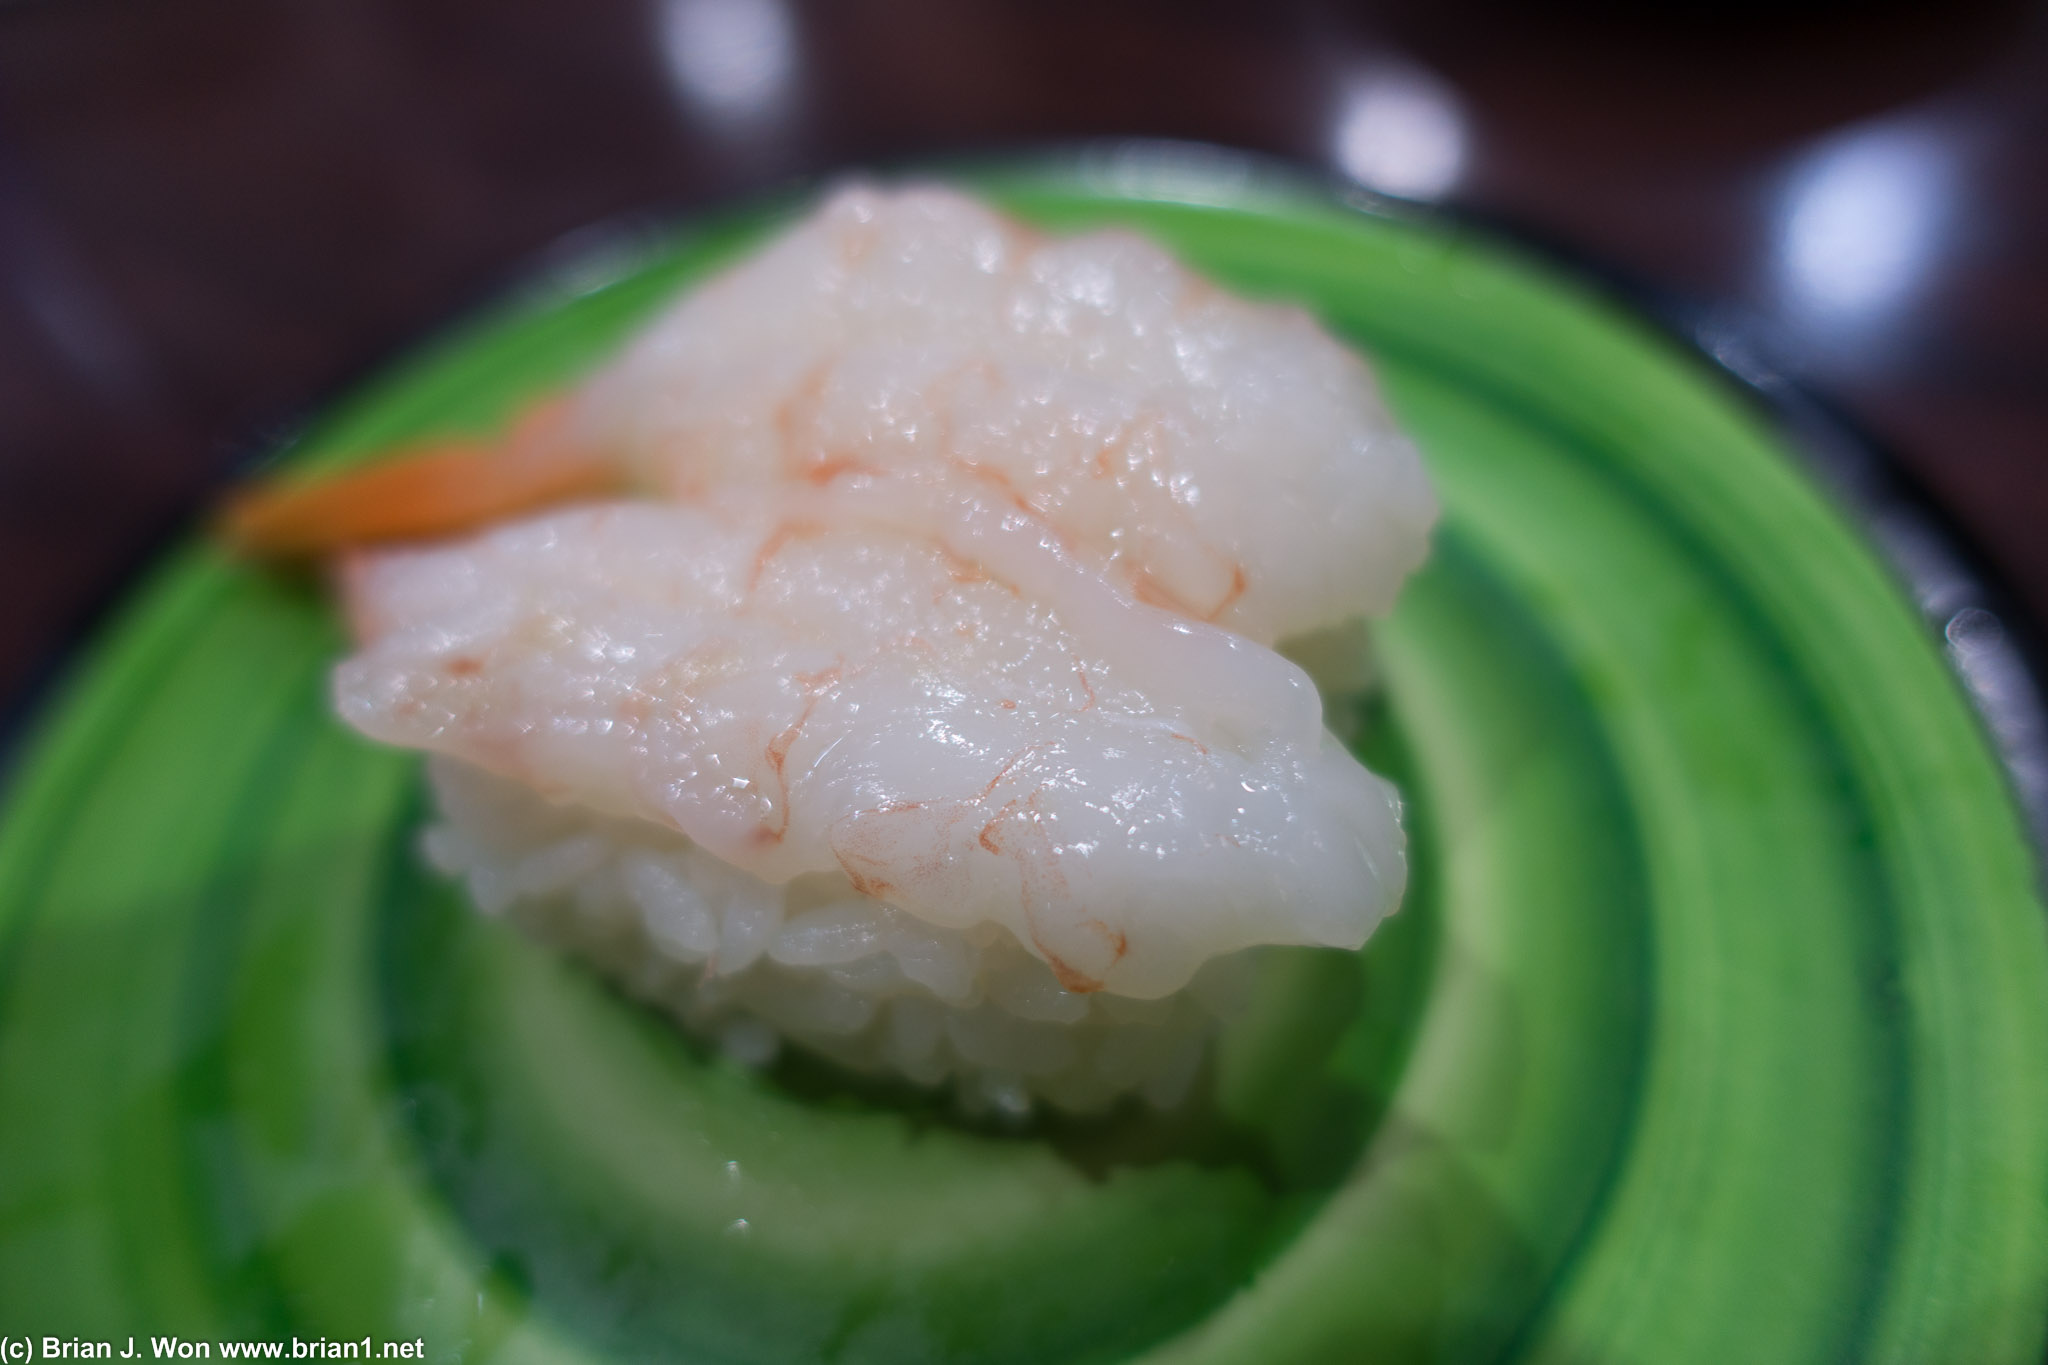 Ama ebi (sweet shrimp) must be getting really cheap if Kula has 2 pieces per plate now.